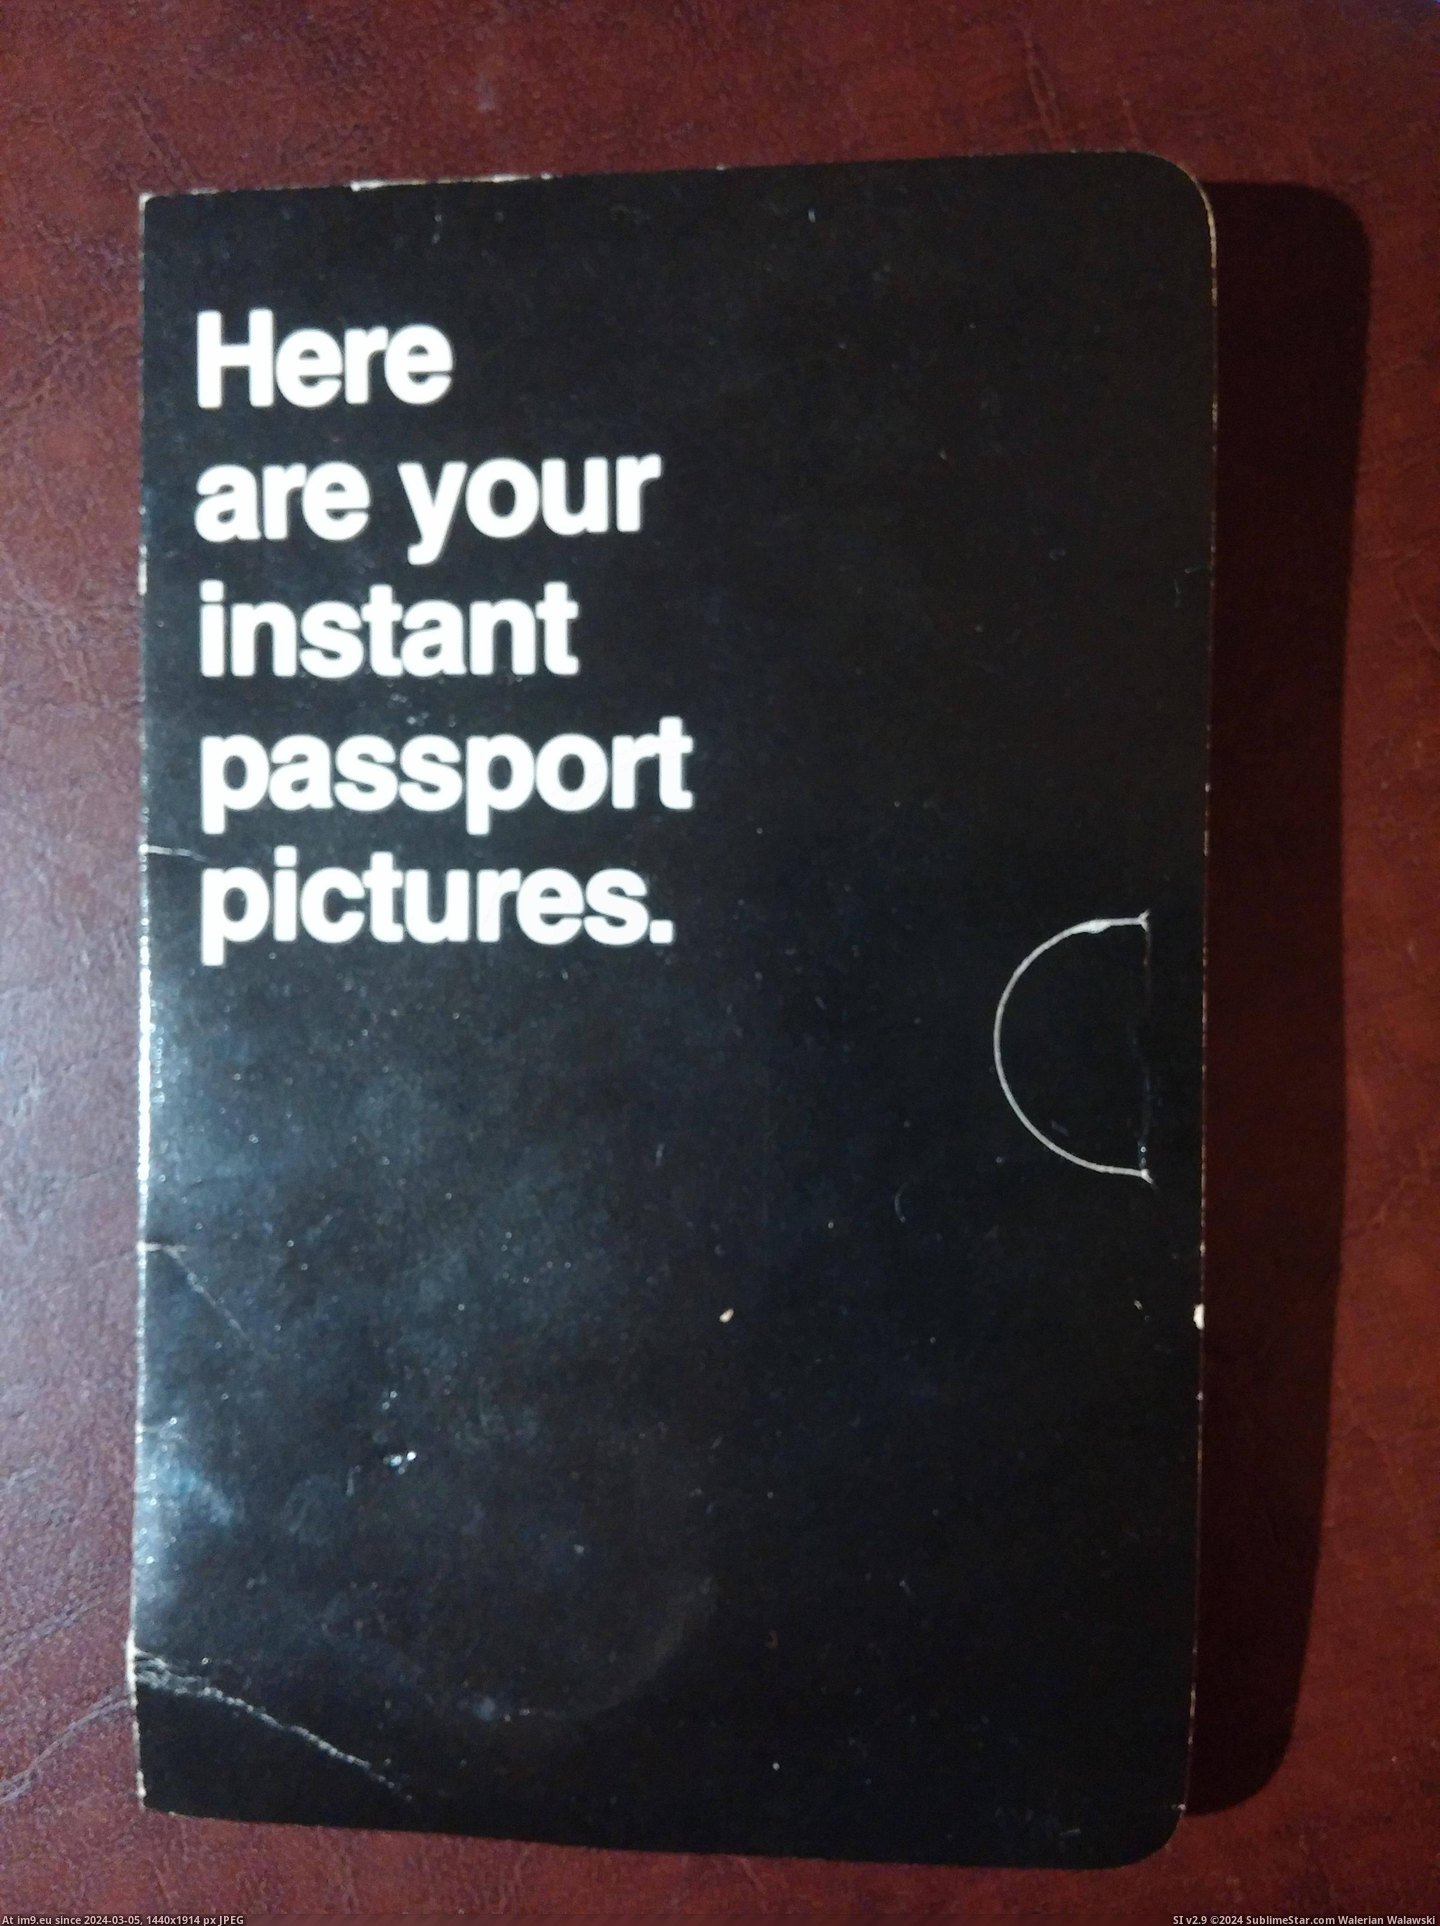 #Photo #Card #80s #Envelope #Passport #Humanity #Cards [Mildlyinteresting] This passport photo envelope from the '80s looks like a Cards Against Humanity card Pic. (Bild von album My r/MILDLYINTERESTING favs))